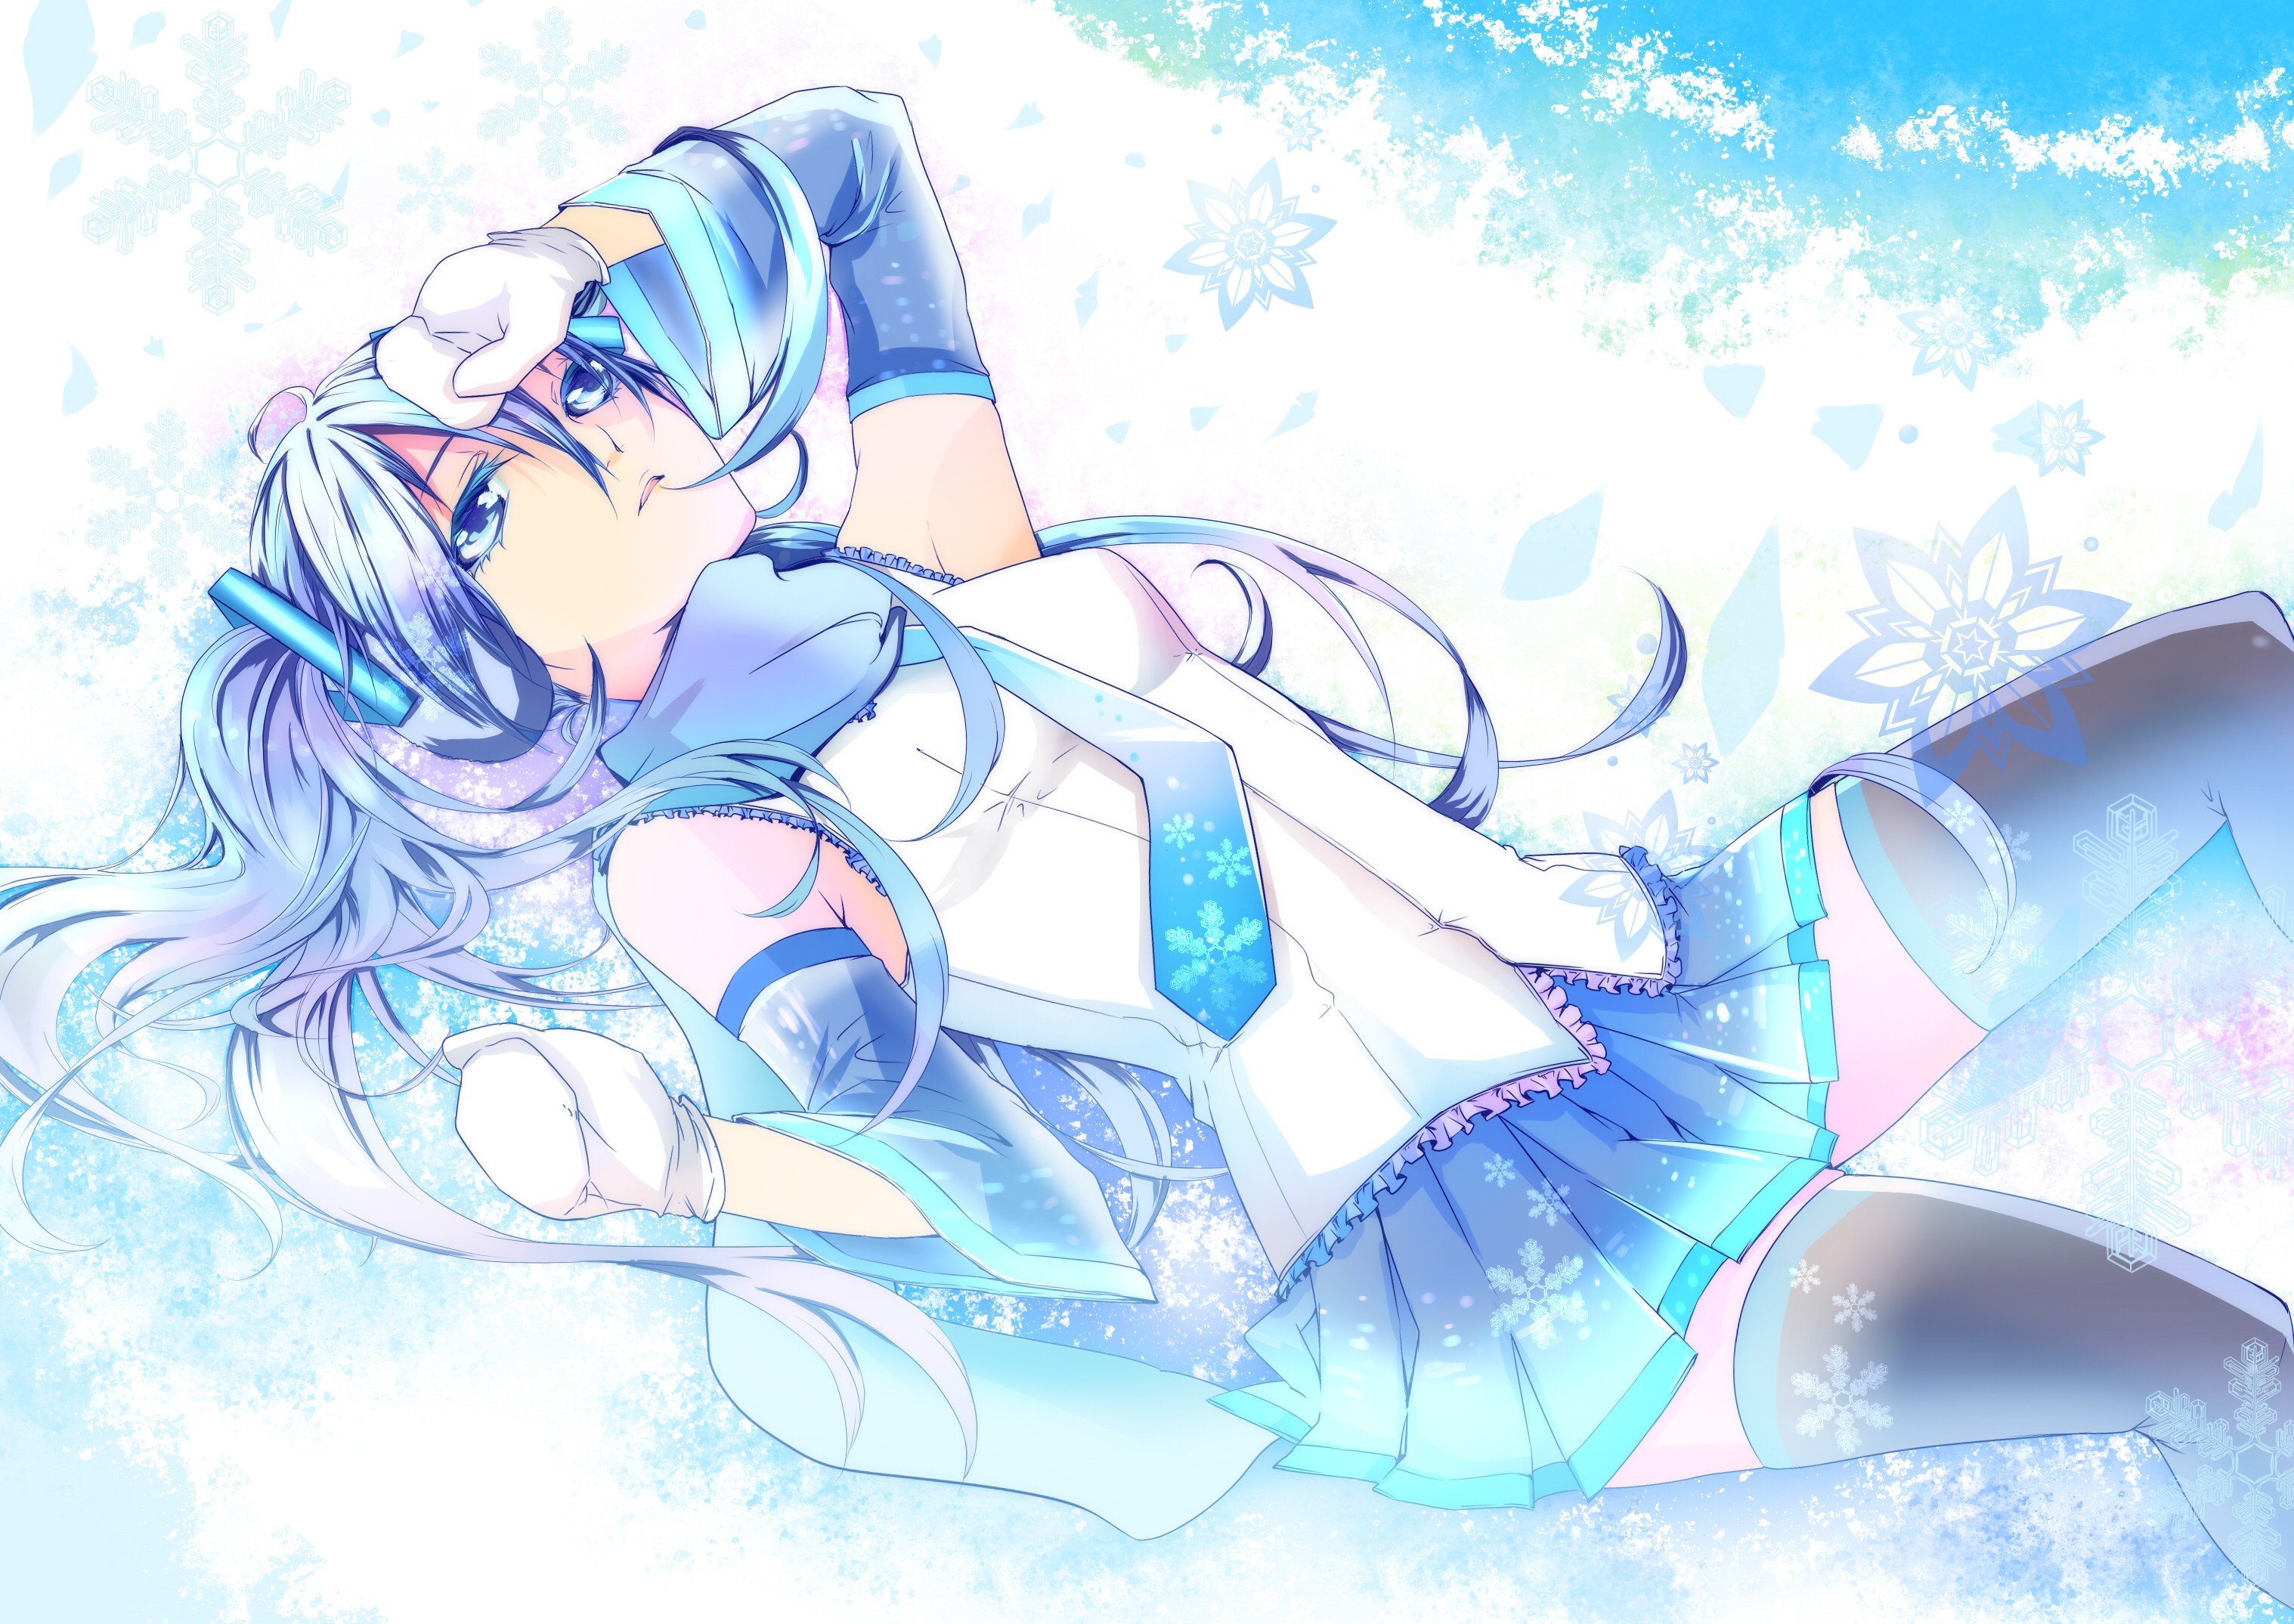 snow, Vocaloid, Gloves, White, Hatsune, Miku, Blue, Eyes, Tie, Skirts, Long, Hair, Thigh, Highs, Twintails, Snowflakes, Lying, Down, Scarfs, White, Hair, Yuki, Miku, Detached, Sleeves, Vocaloid, Fanmade Wallpaper